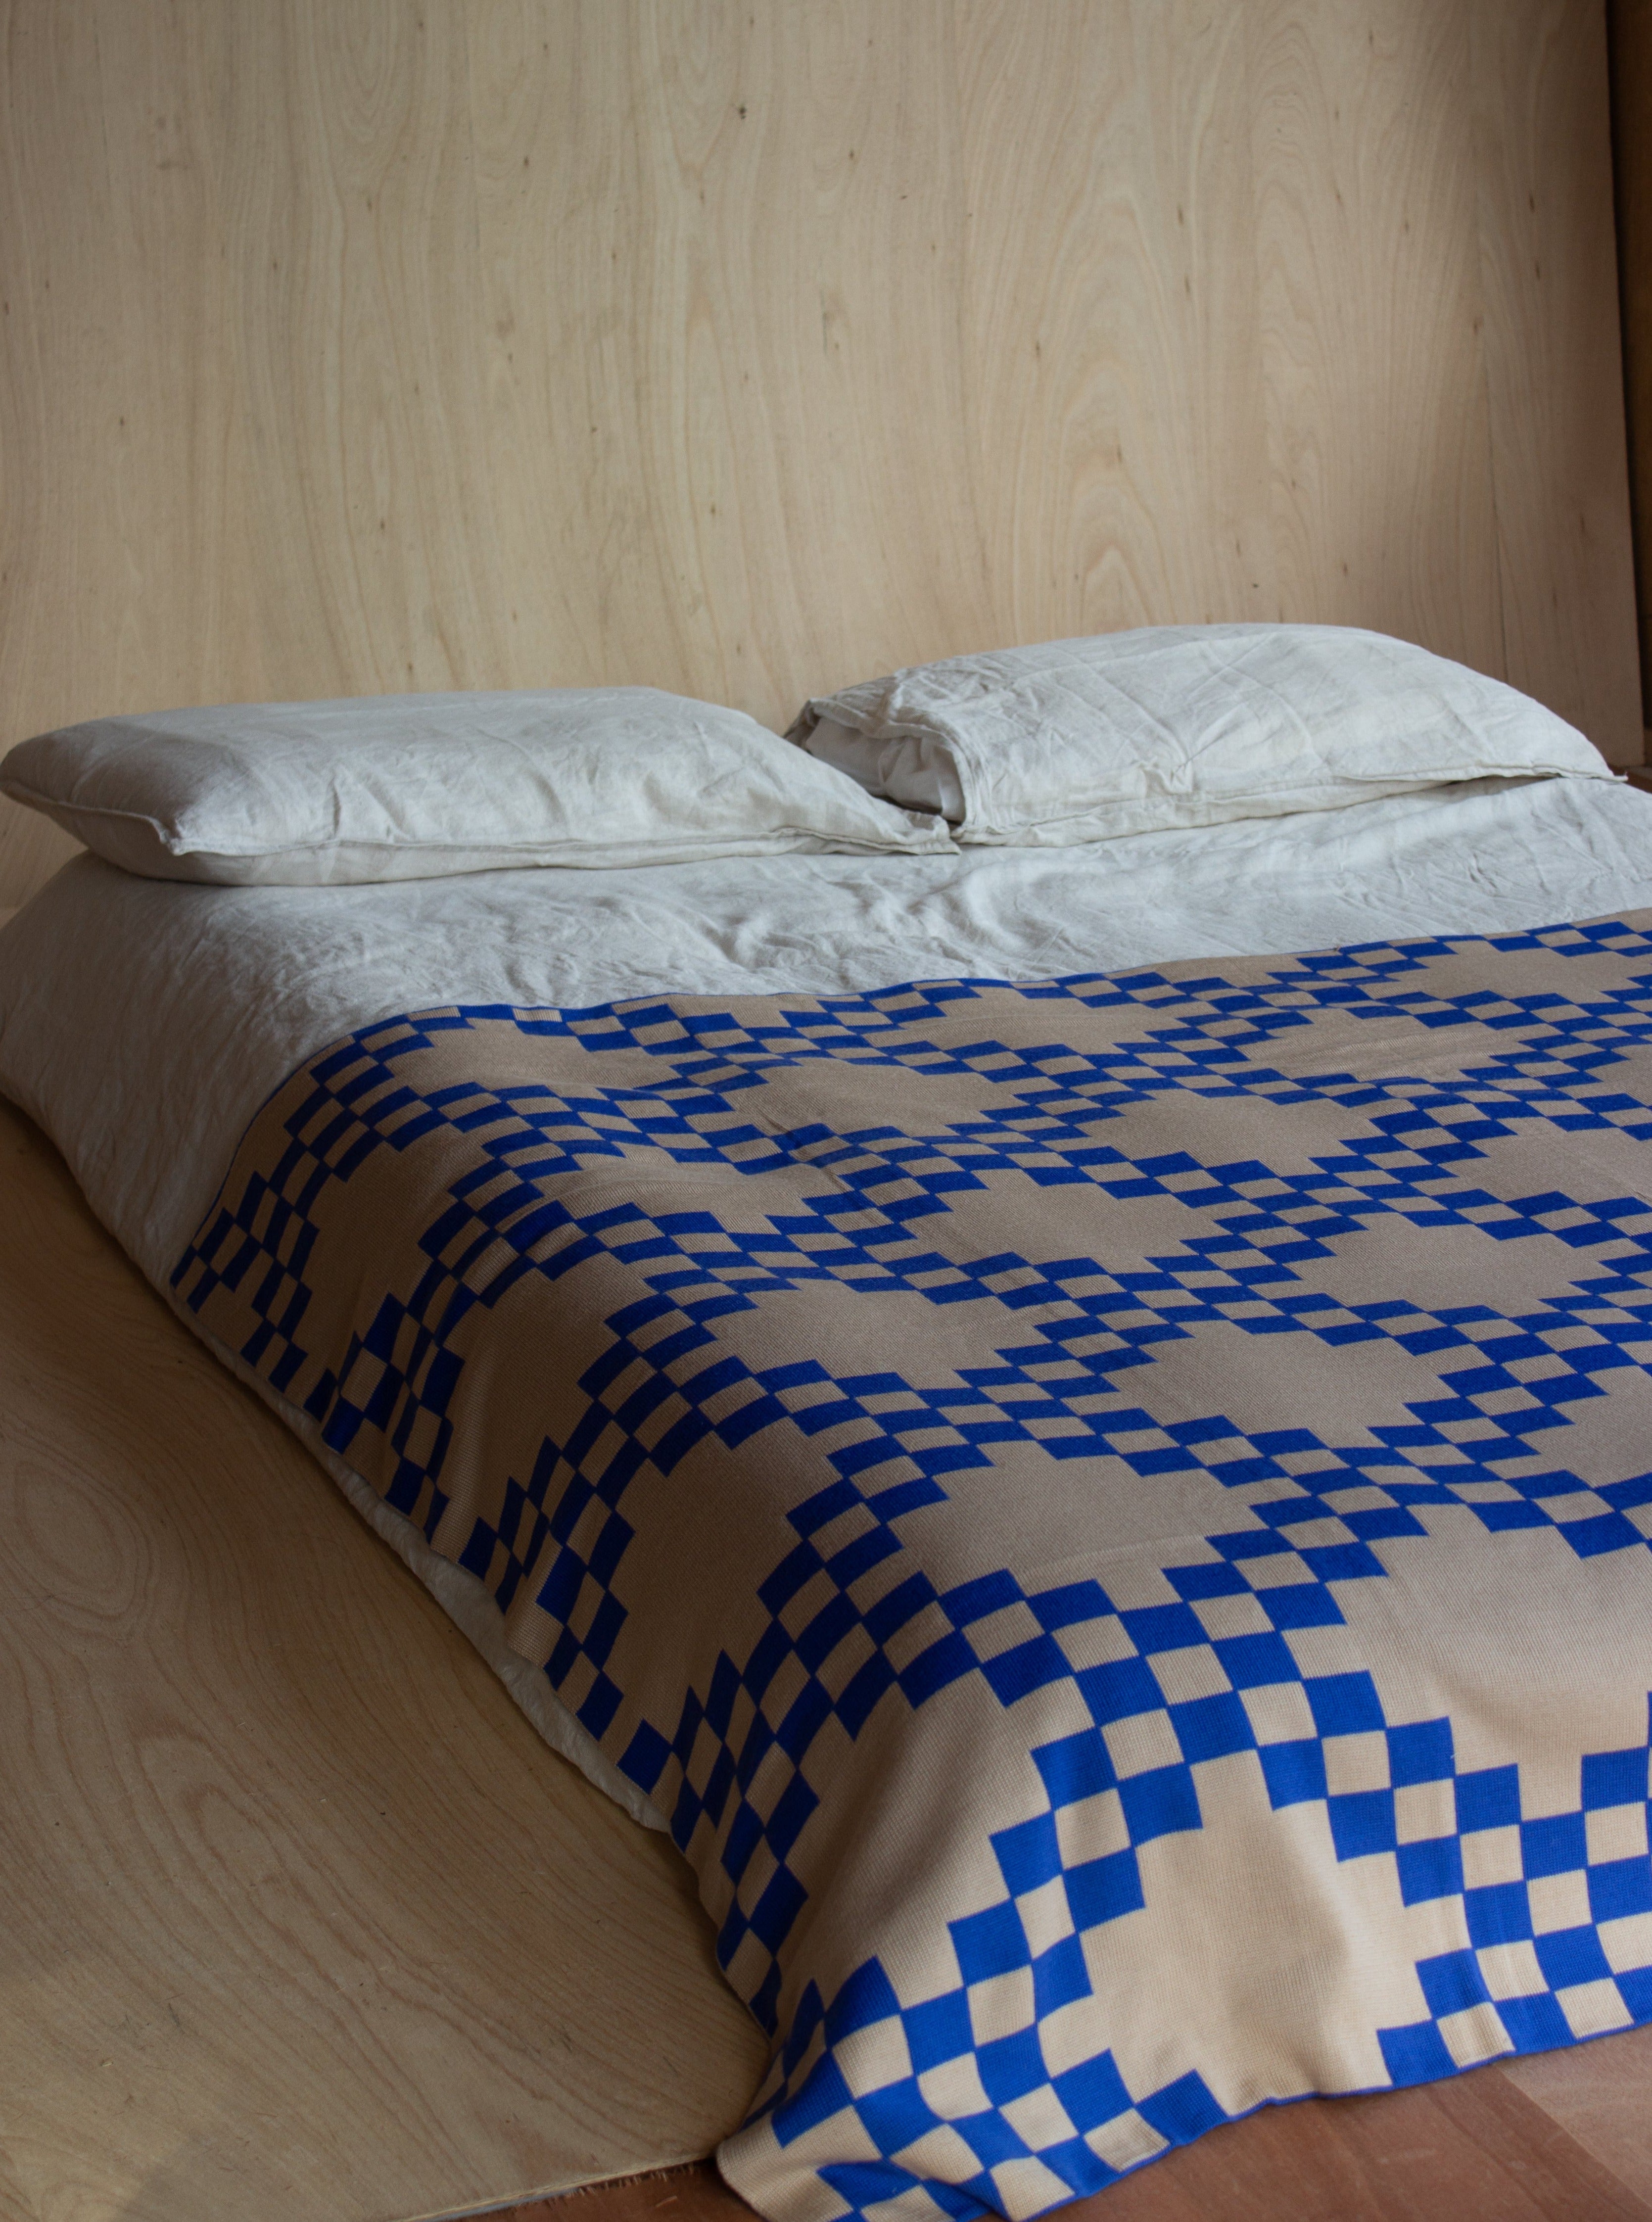 The WAVE blanket in CURIO’s signature balanced chain check is knitted from the finest Merino wool yarn (21 microns) for unparalleled softness and durability. Blanket edges are finished by hand, and the CURIO label affixed to each blanket is embroidered in Central Victoria from Australian cotton and attached by hand.. The blanket is Bright blue with checked pattern throughout and a mushroom base colour